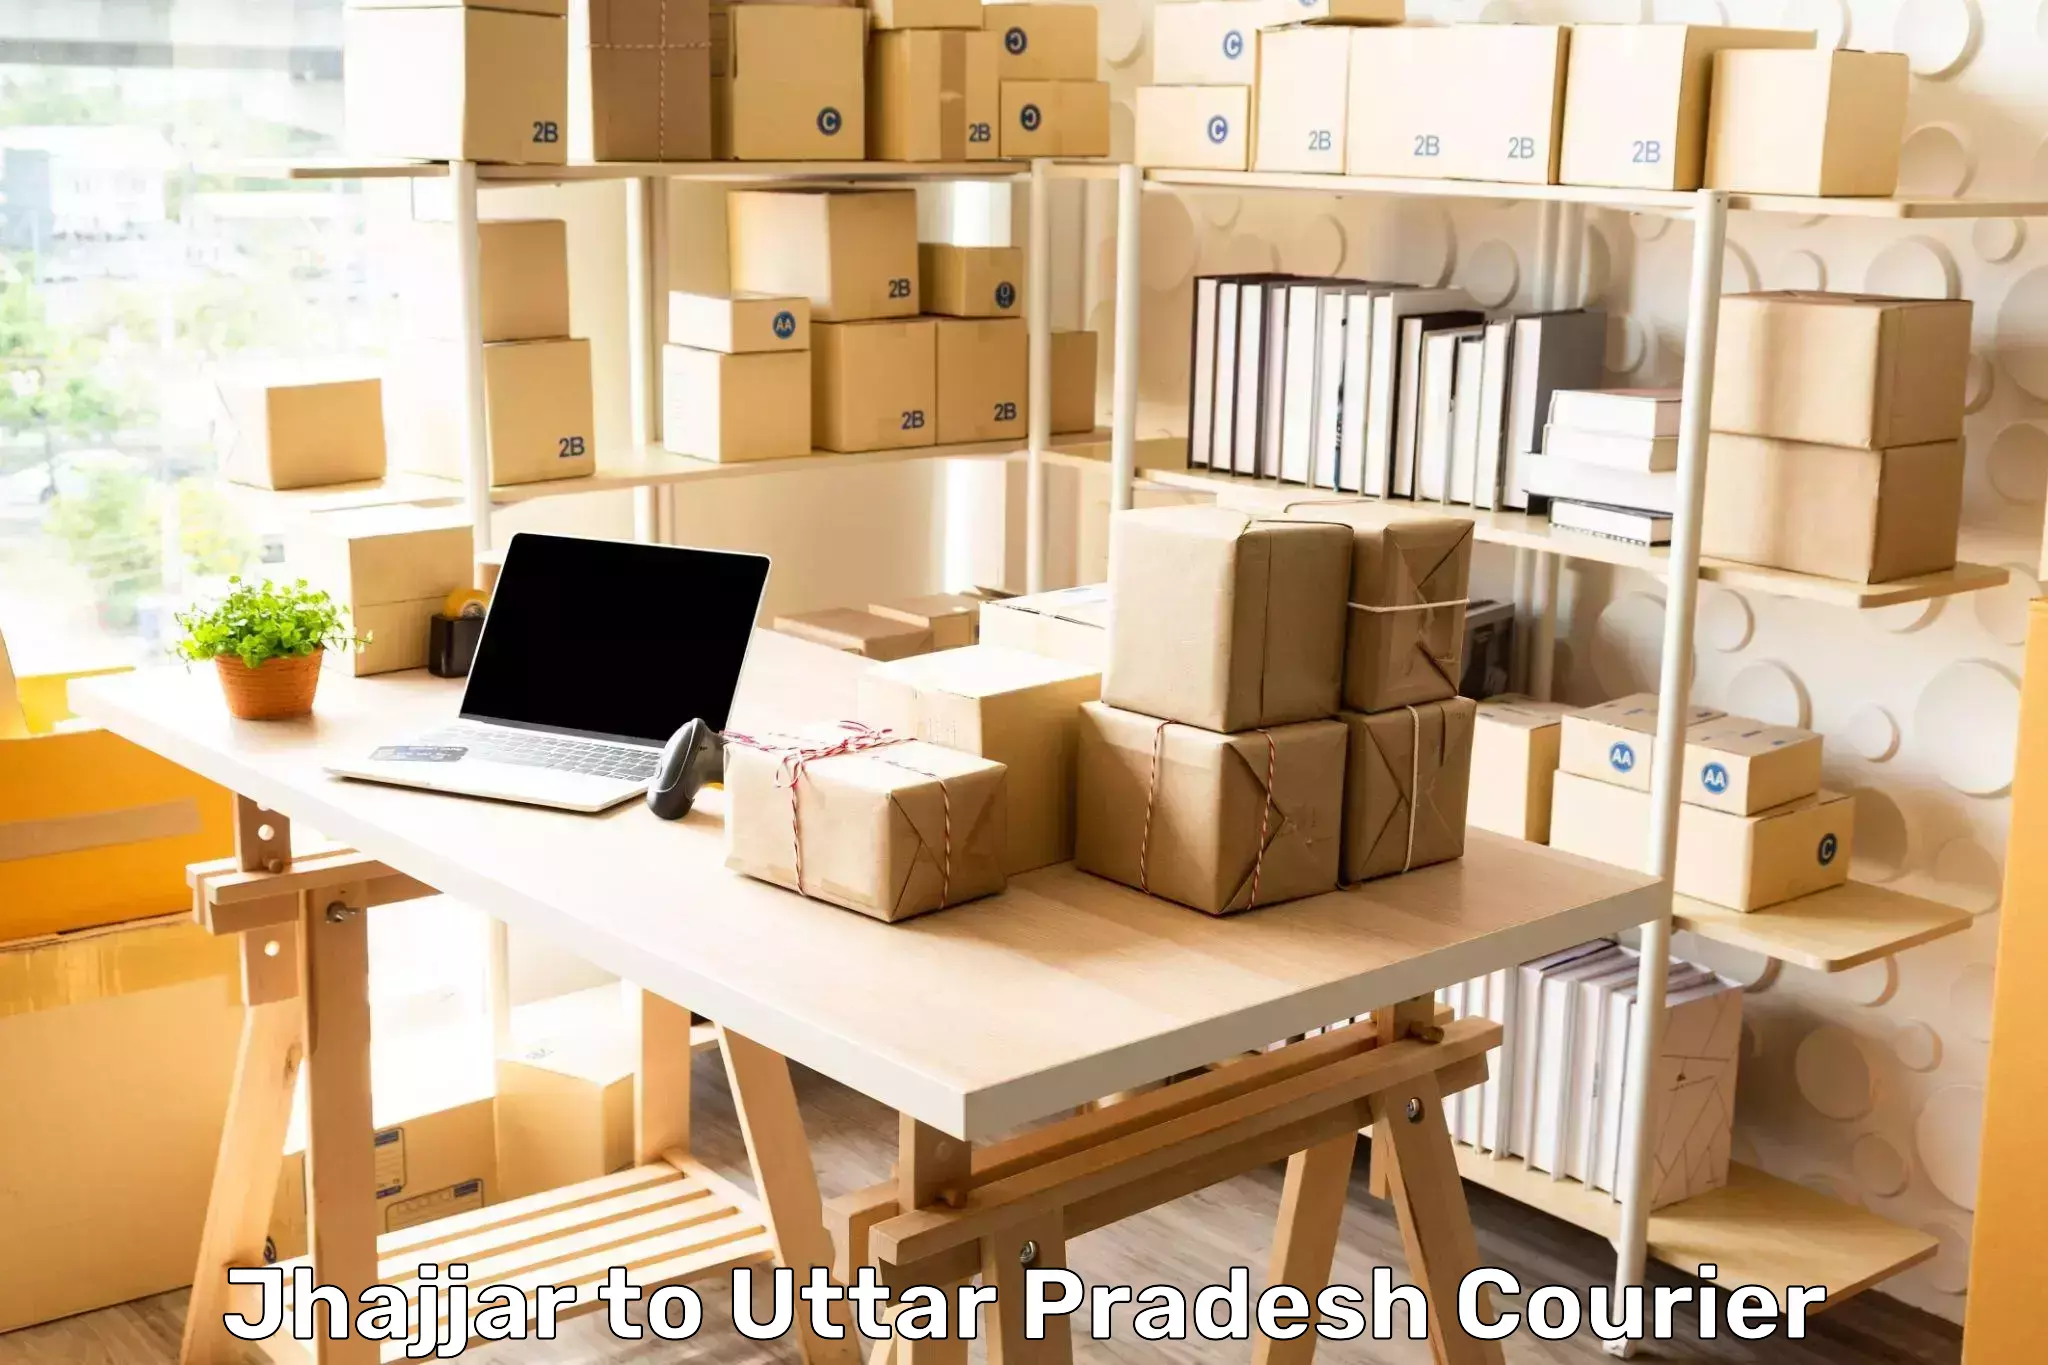 Subscription-based courier Jhajjar to Sonbhadra